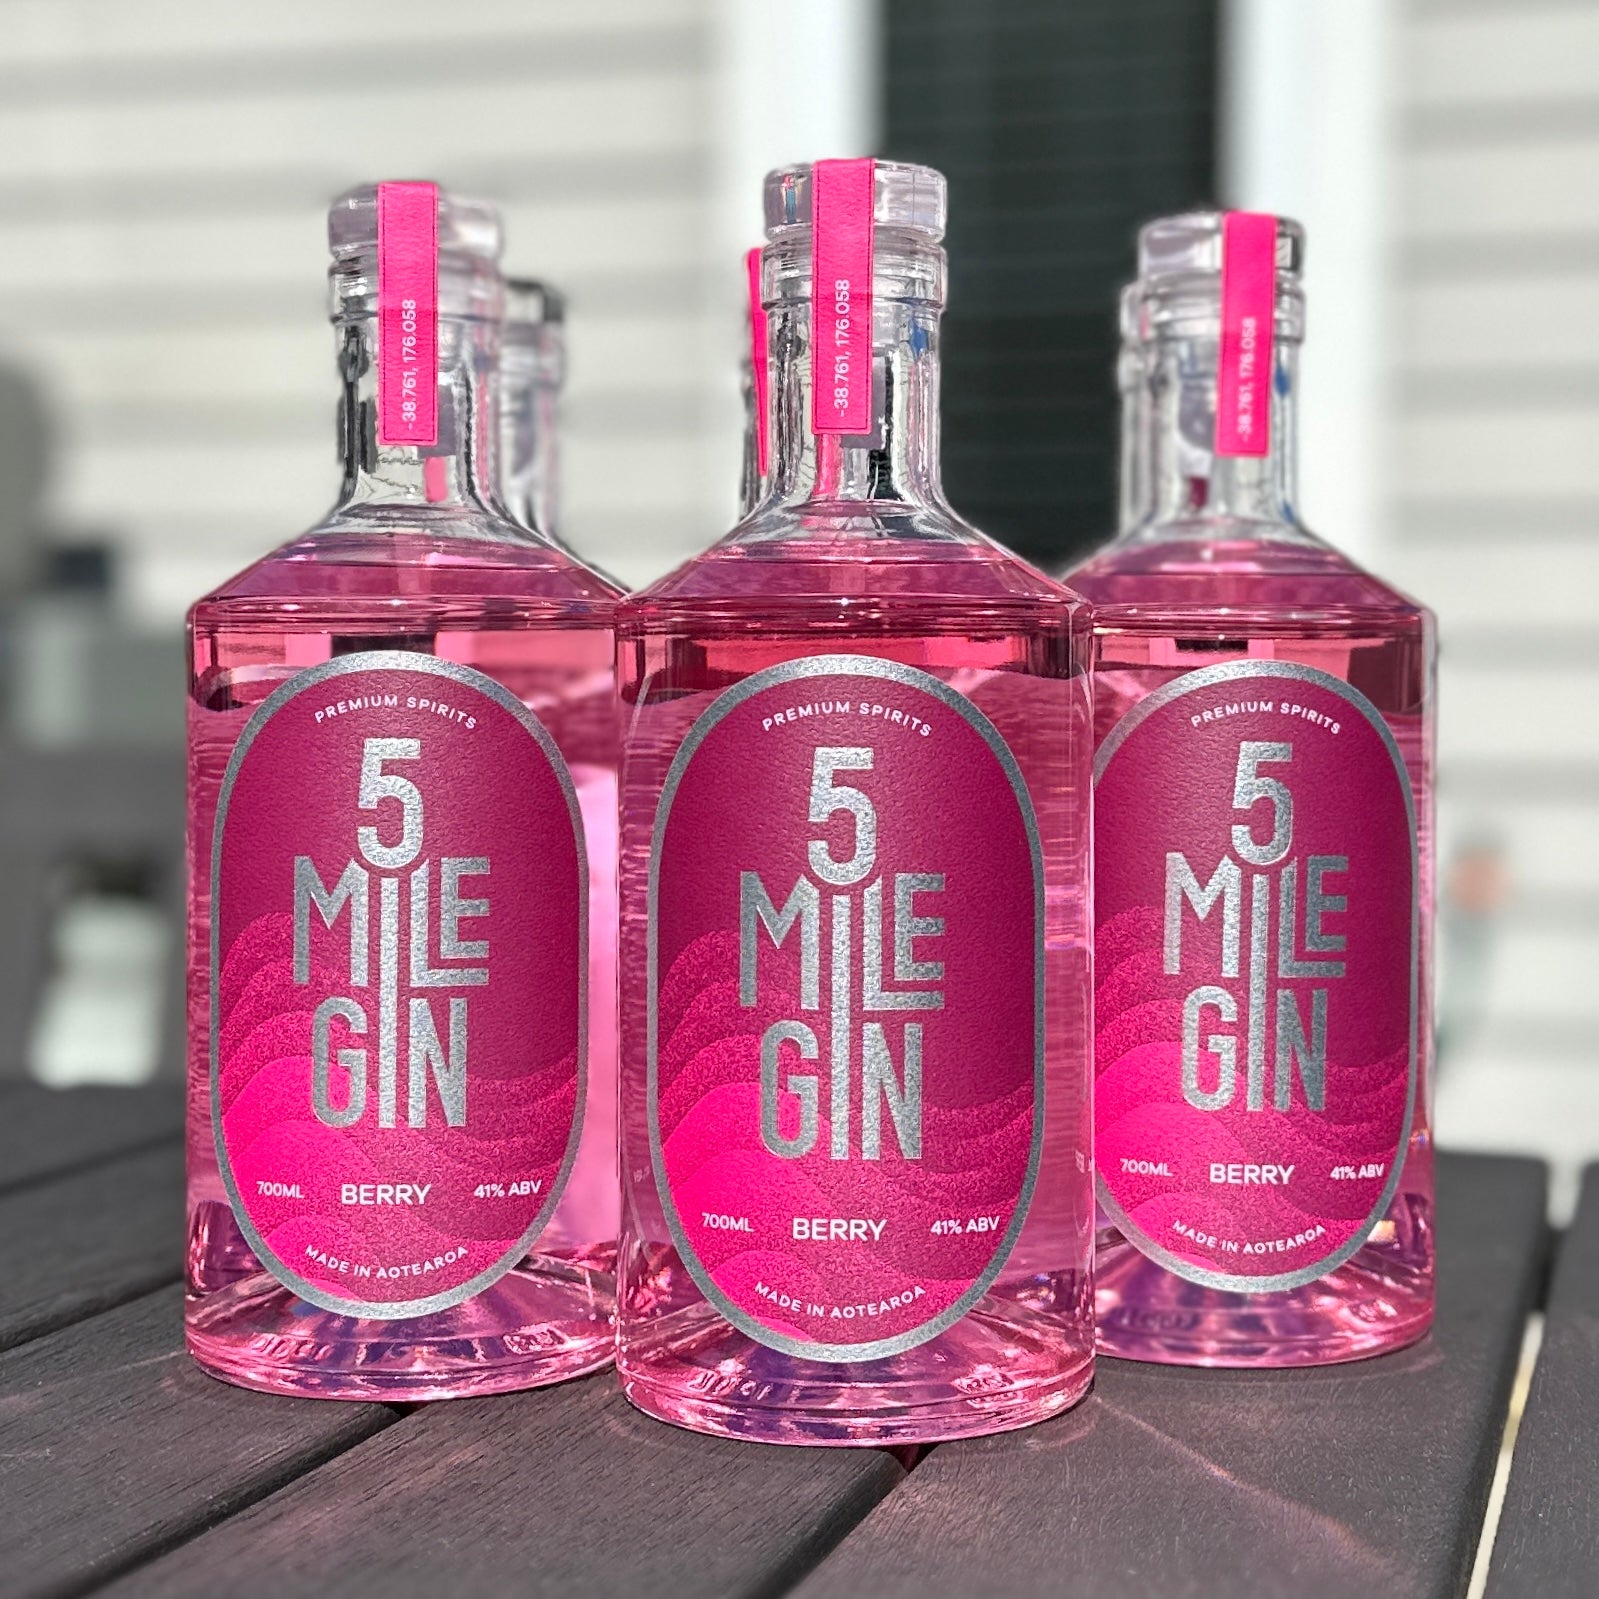 5 Mile Berry Gin from 5 Mile Distilling